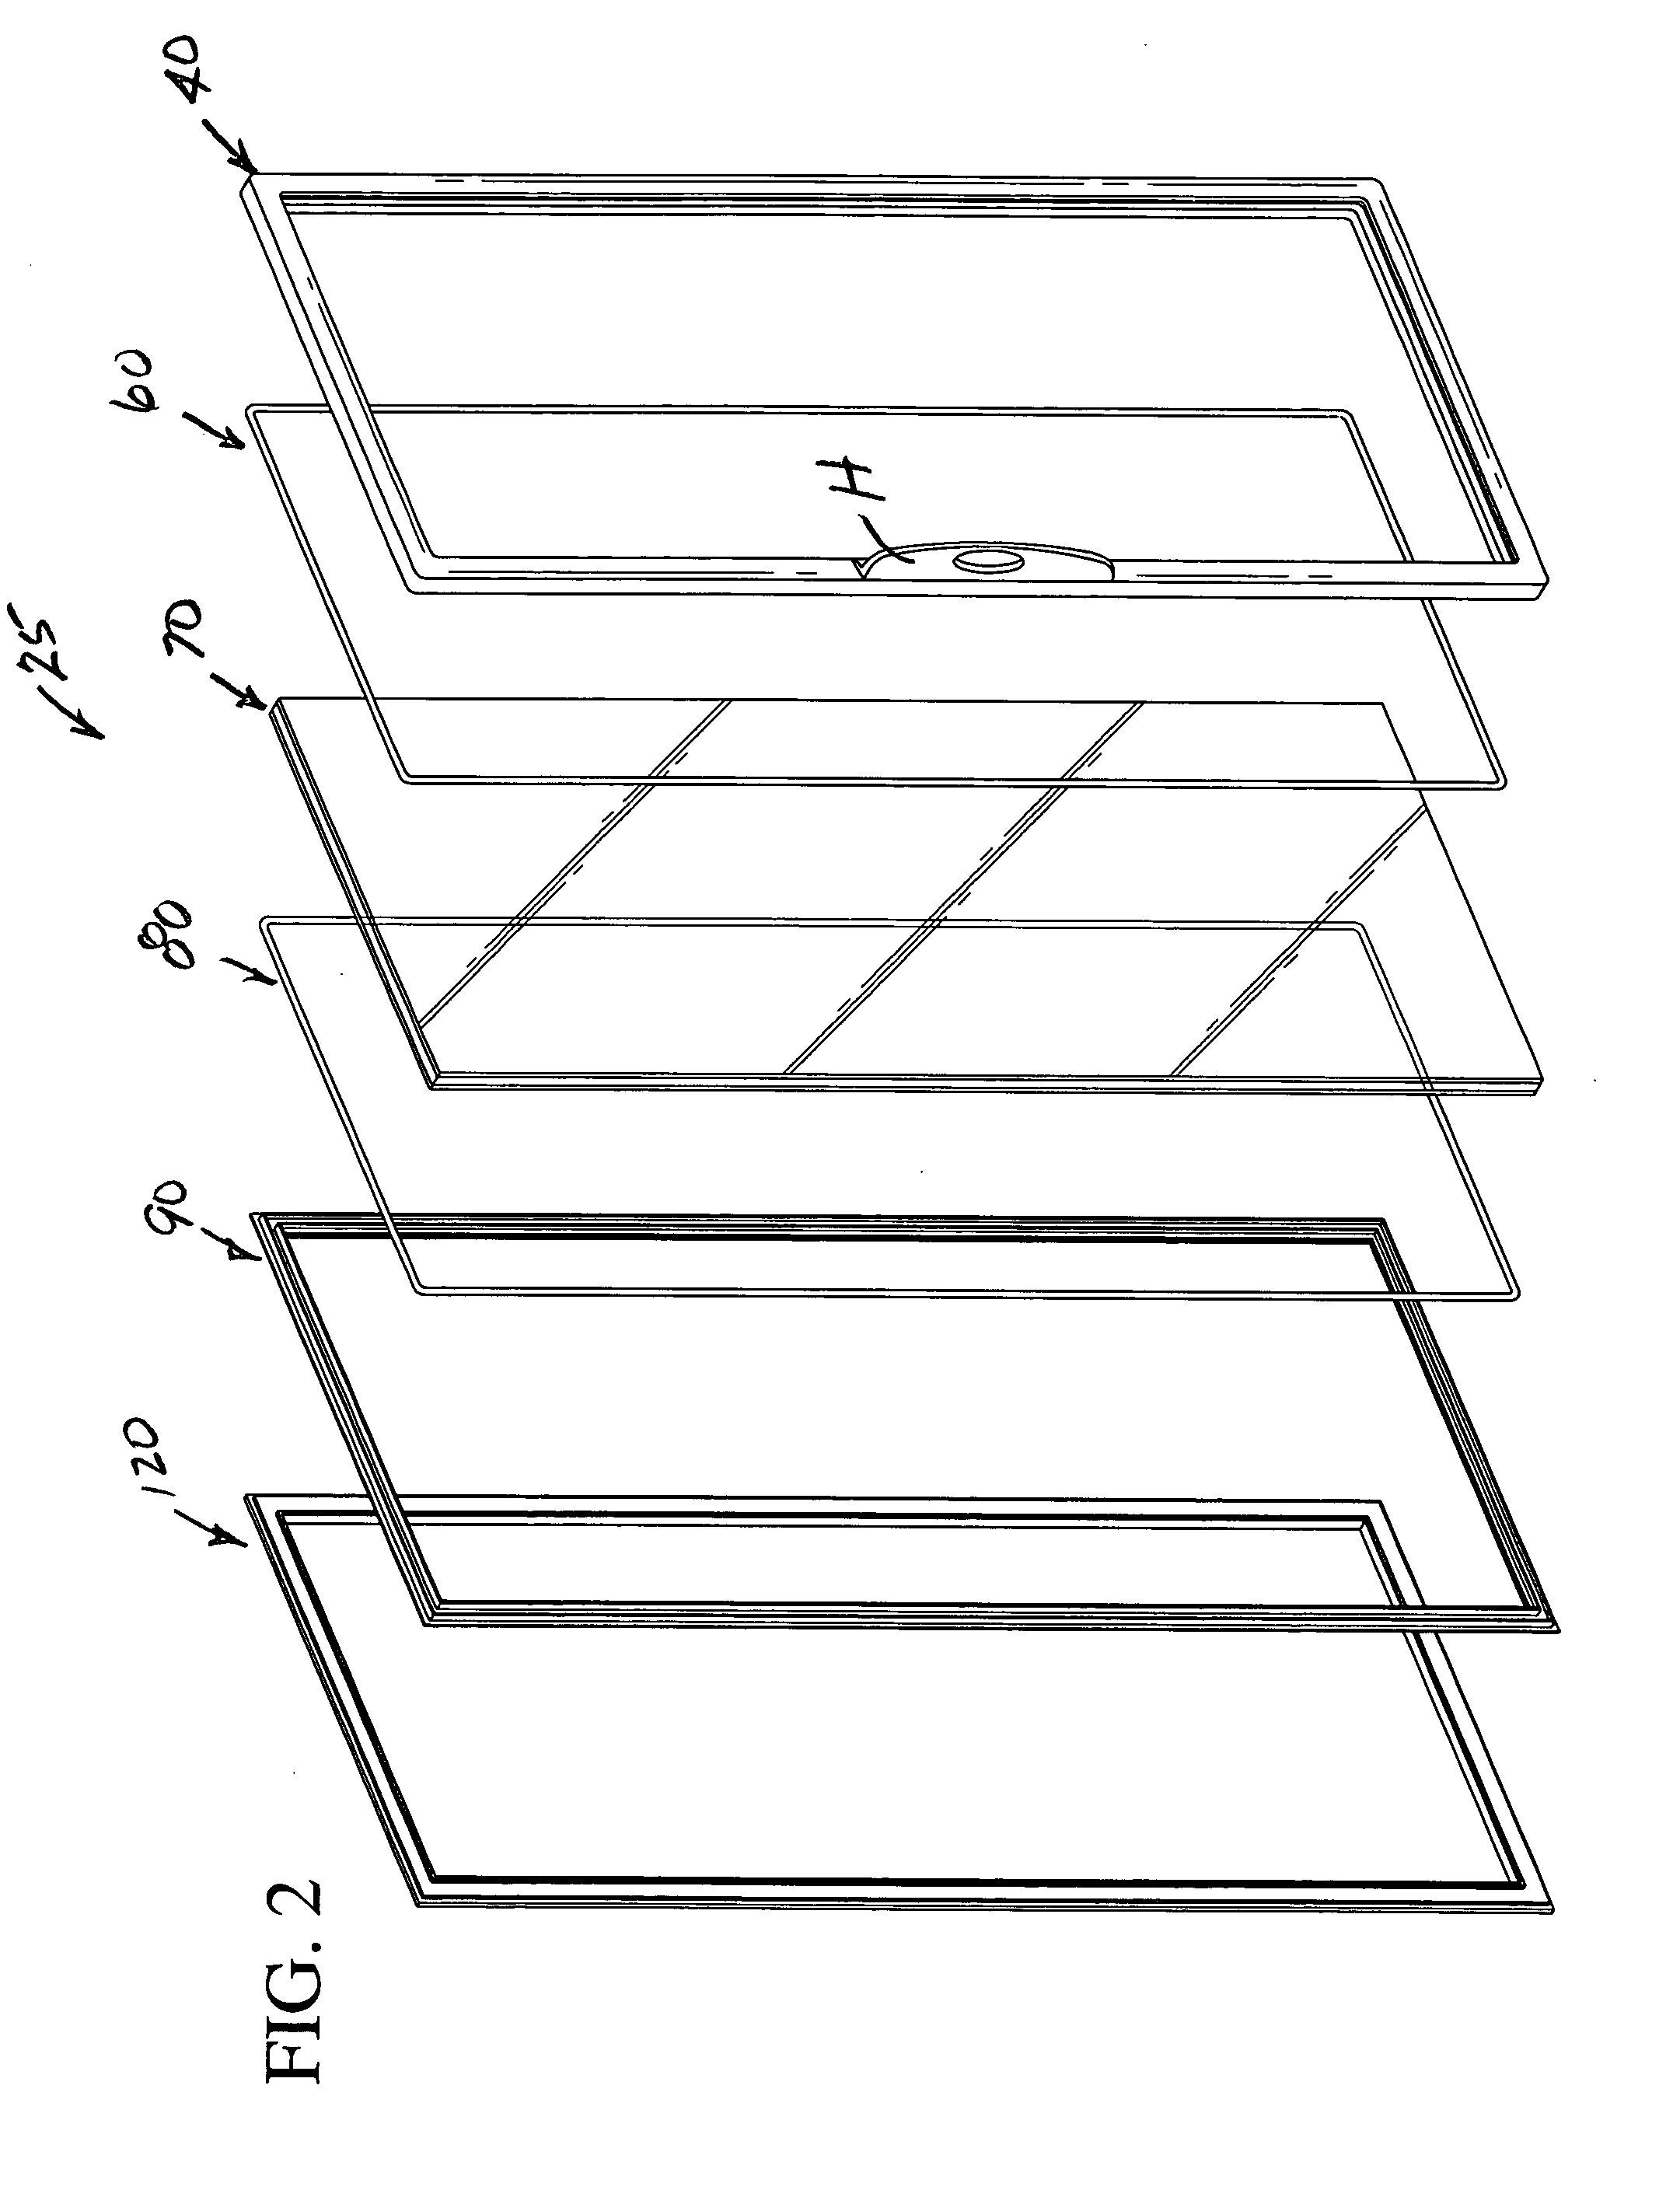 Refrigerated display case door and method of manufacture